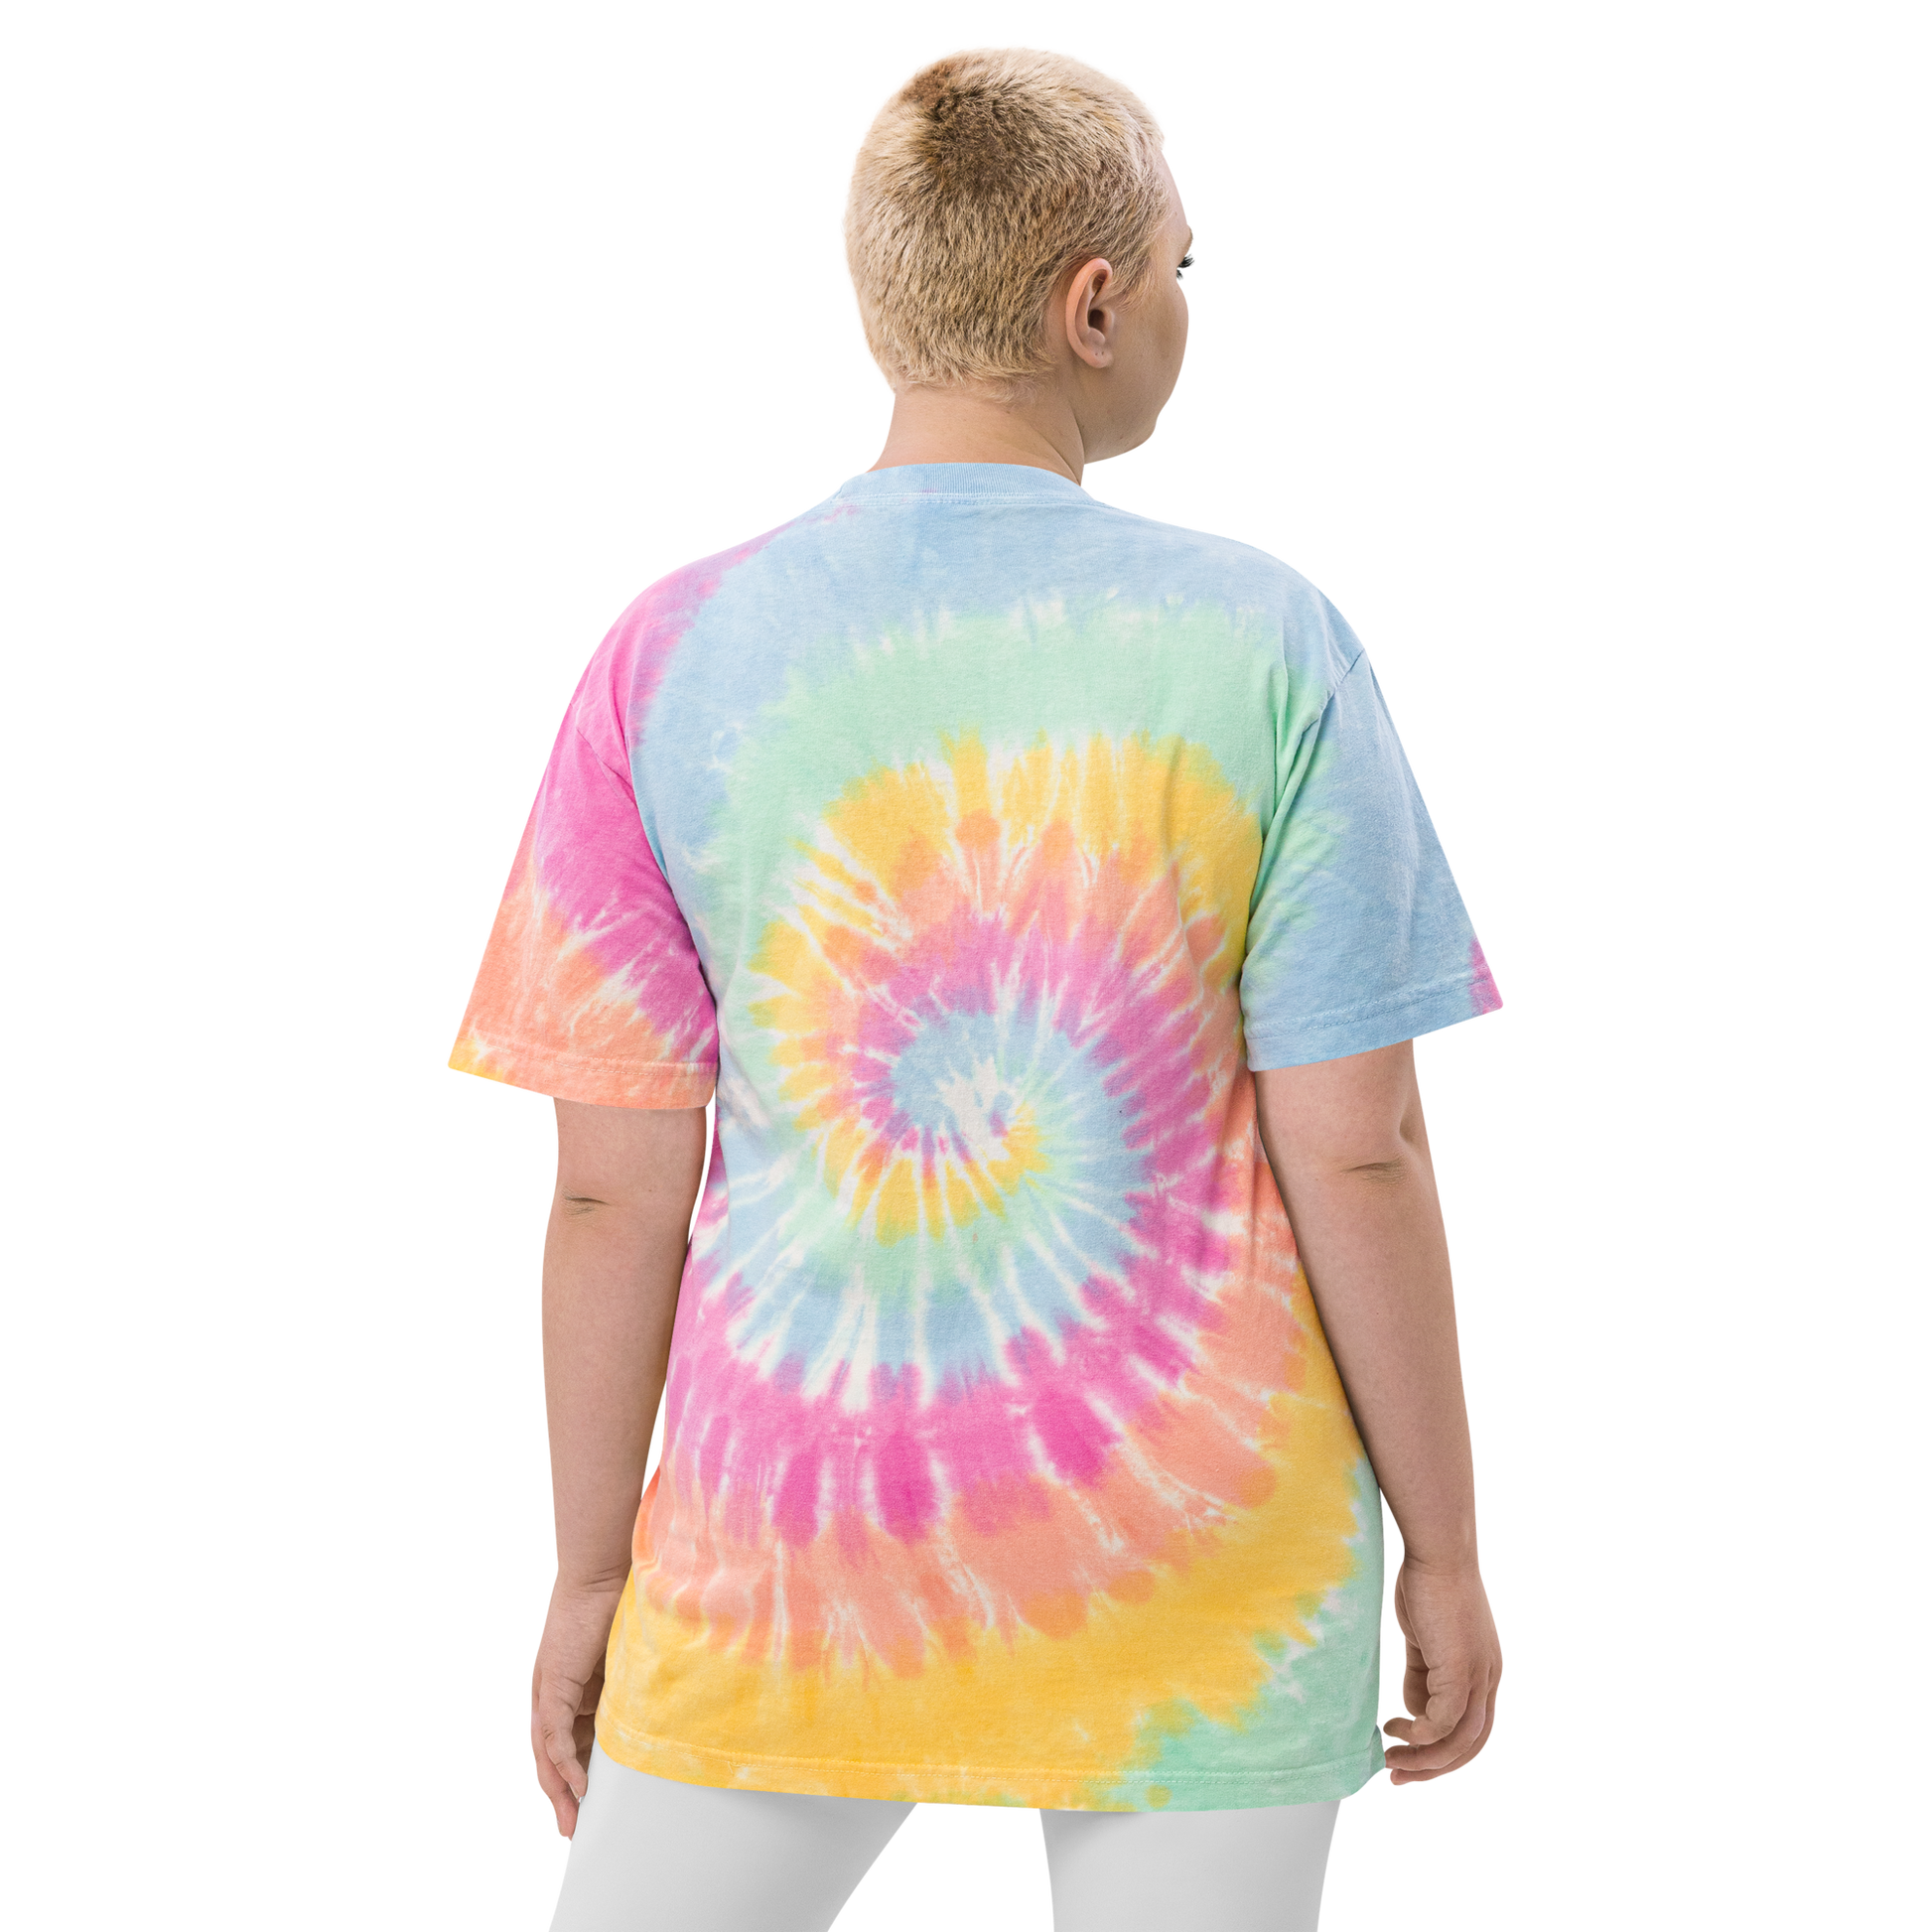 Crossed-X Oversized Tie-Dye T-Shirt • YMM Fort McMurray • YHM Designs - Image 12